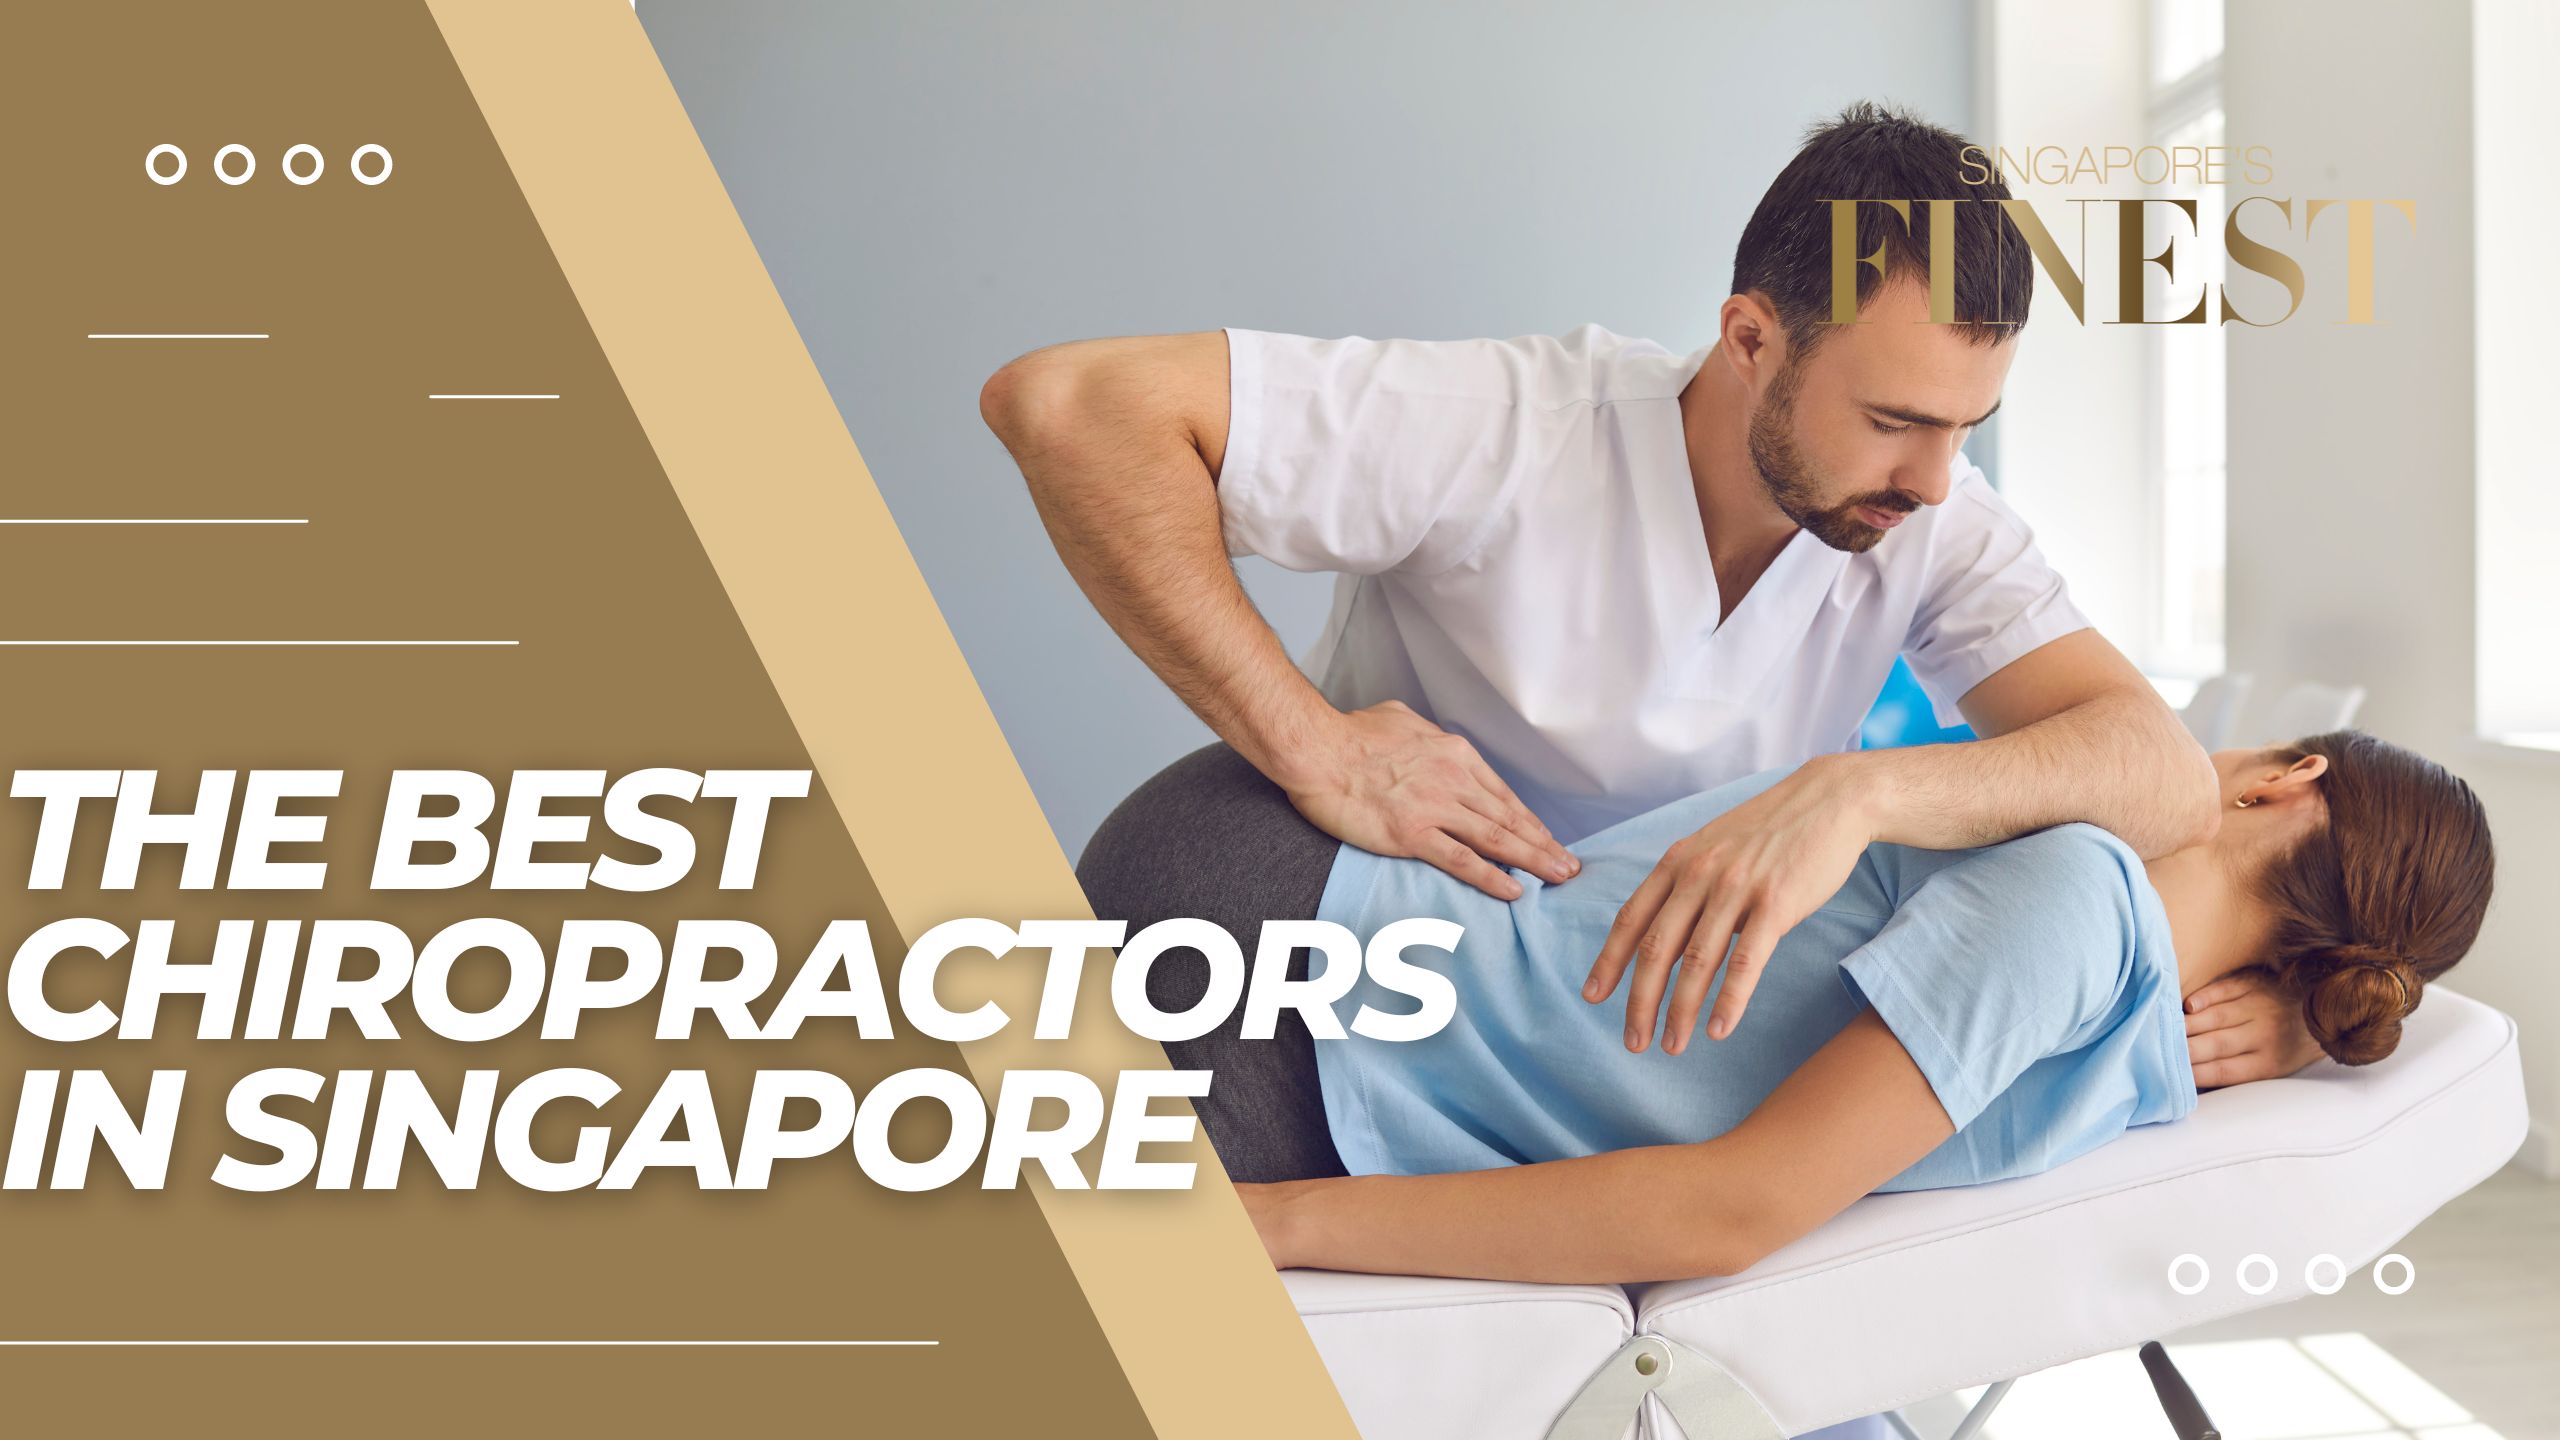 The Finest Chiropractors in Singapore